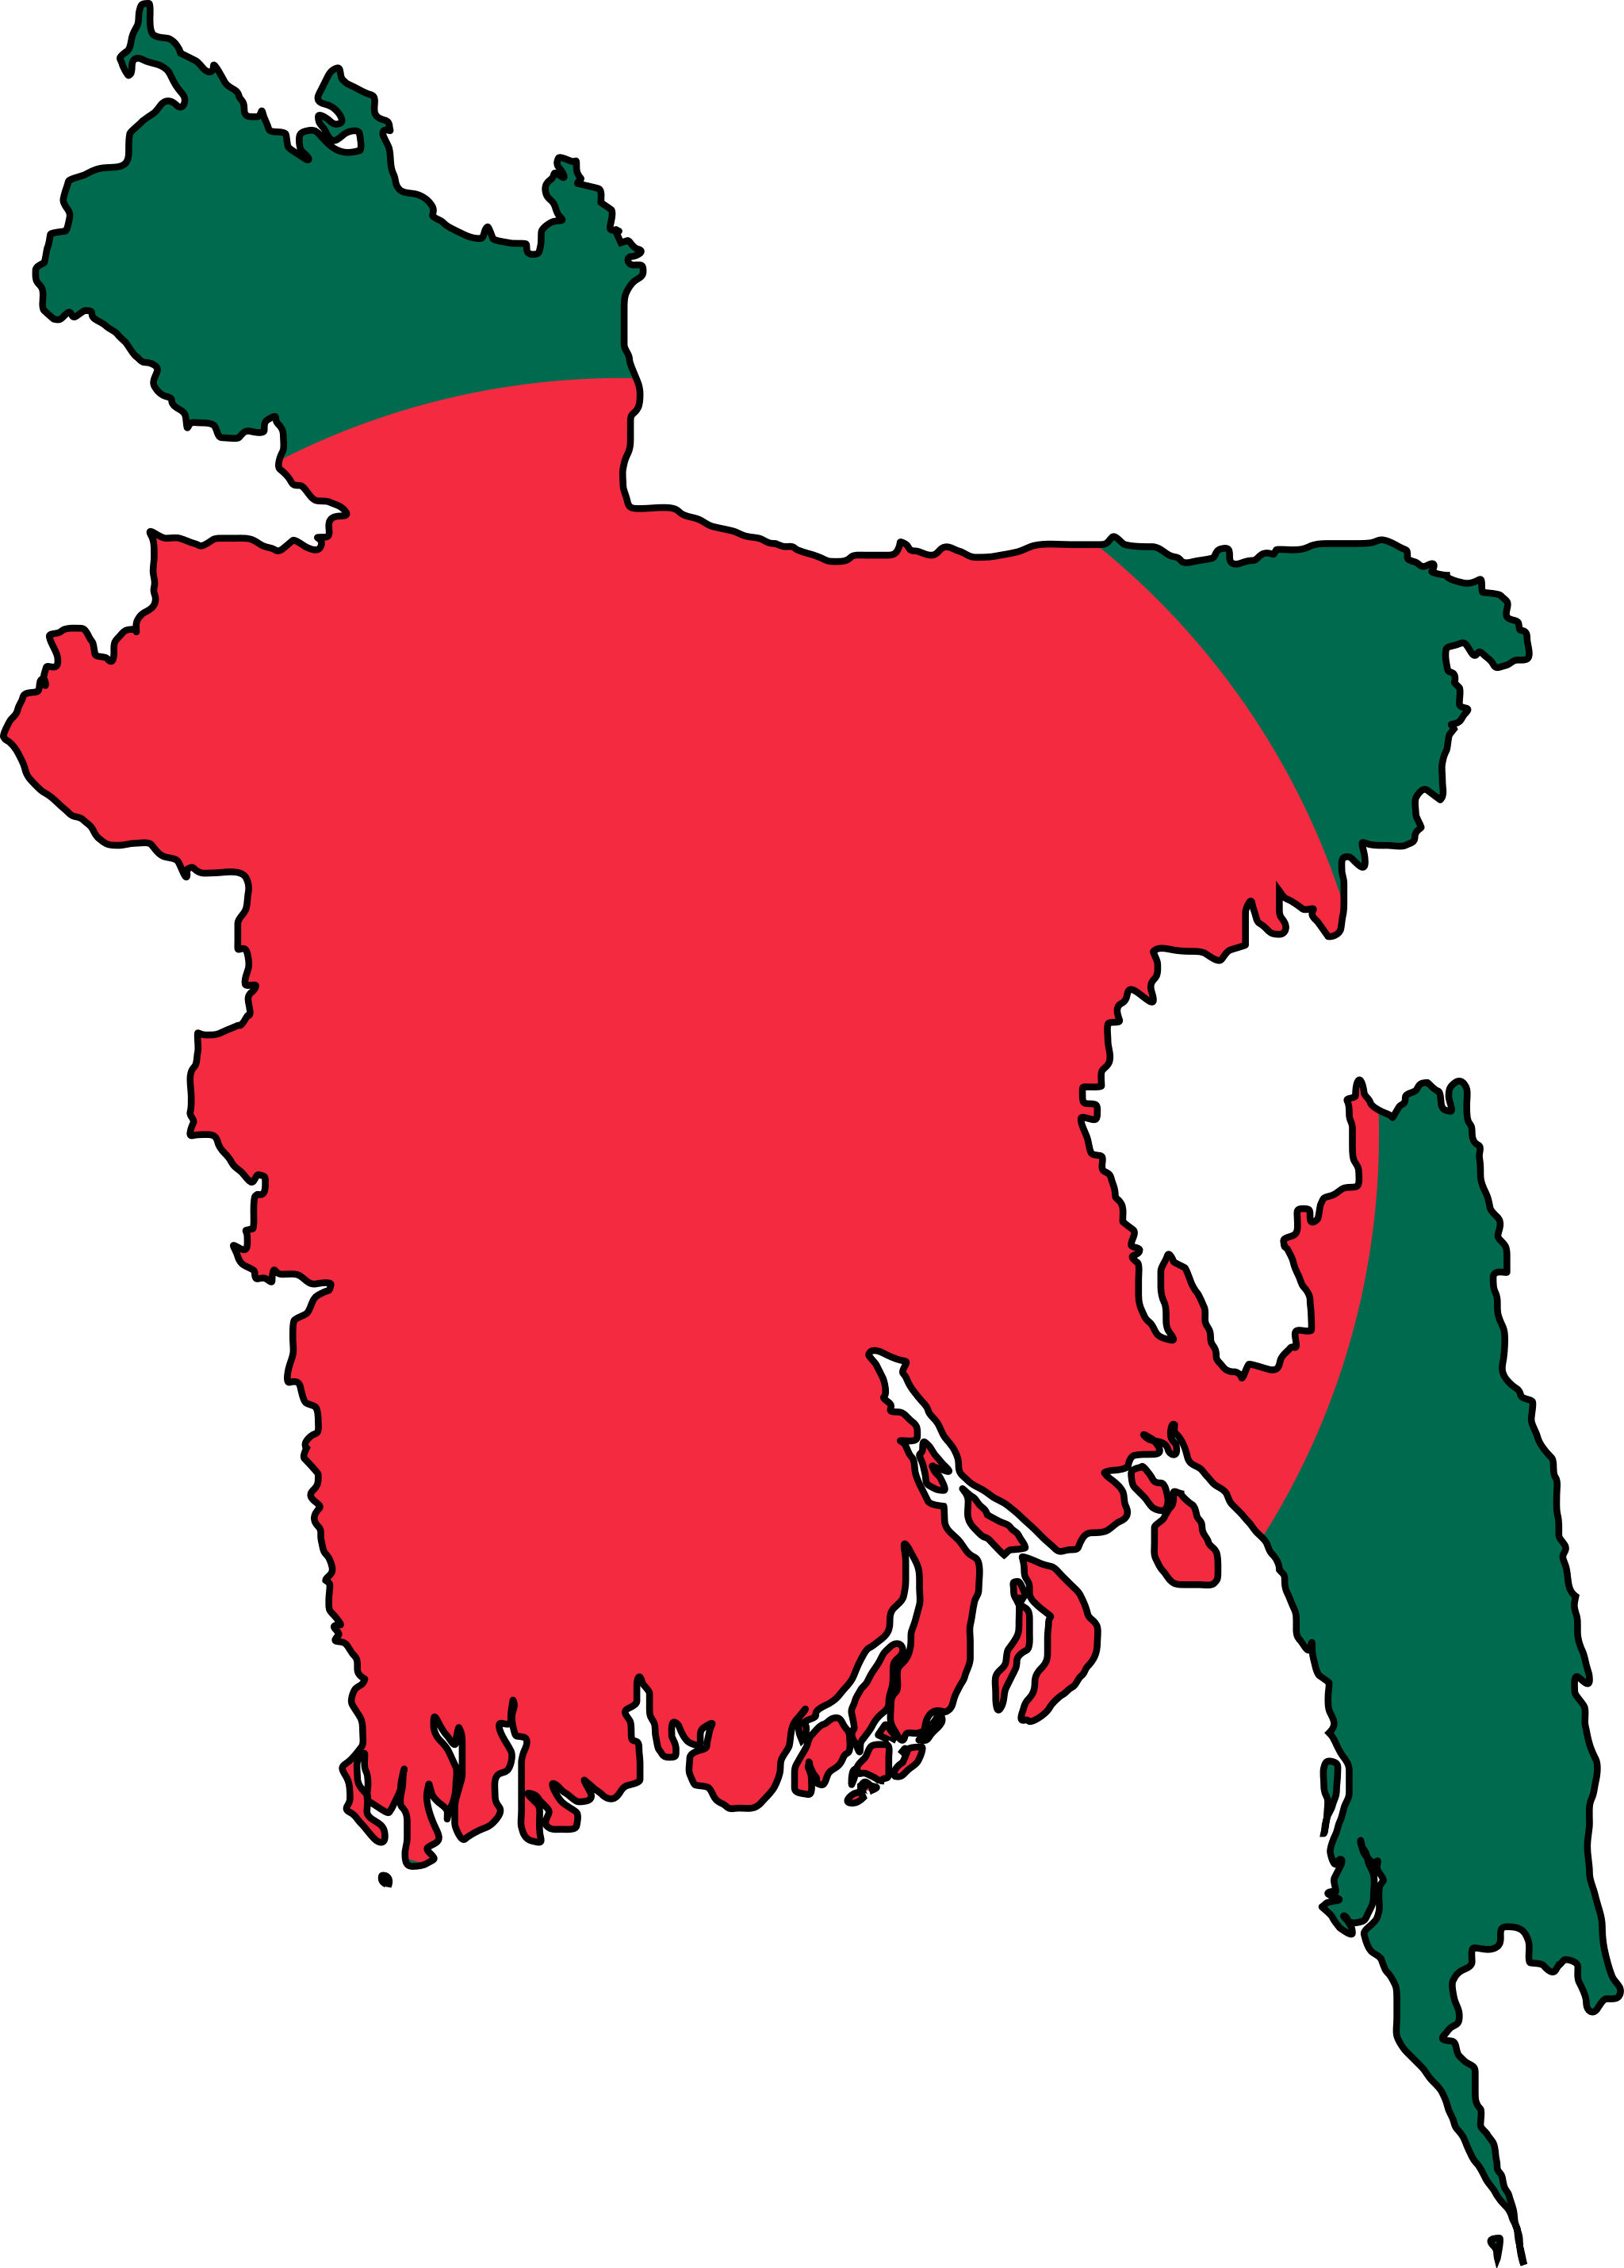 Marker clipart flag. Of bangladesh clipground map